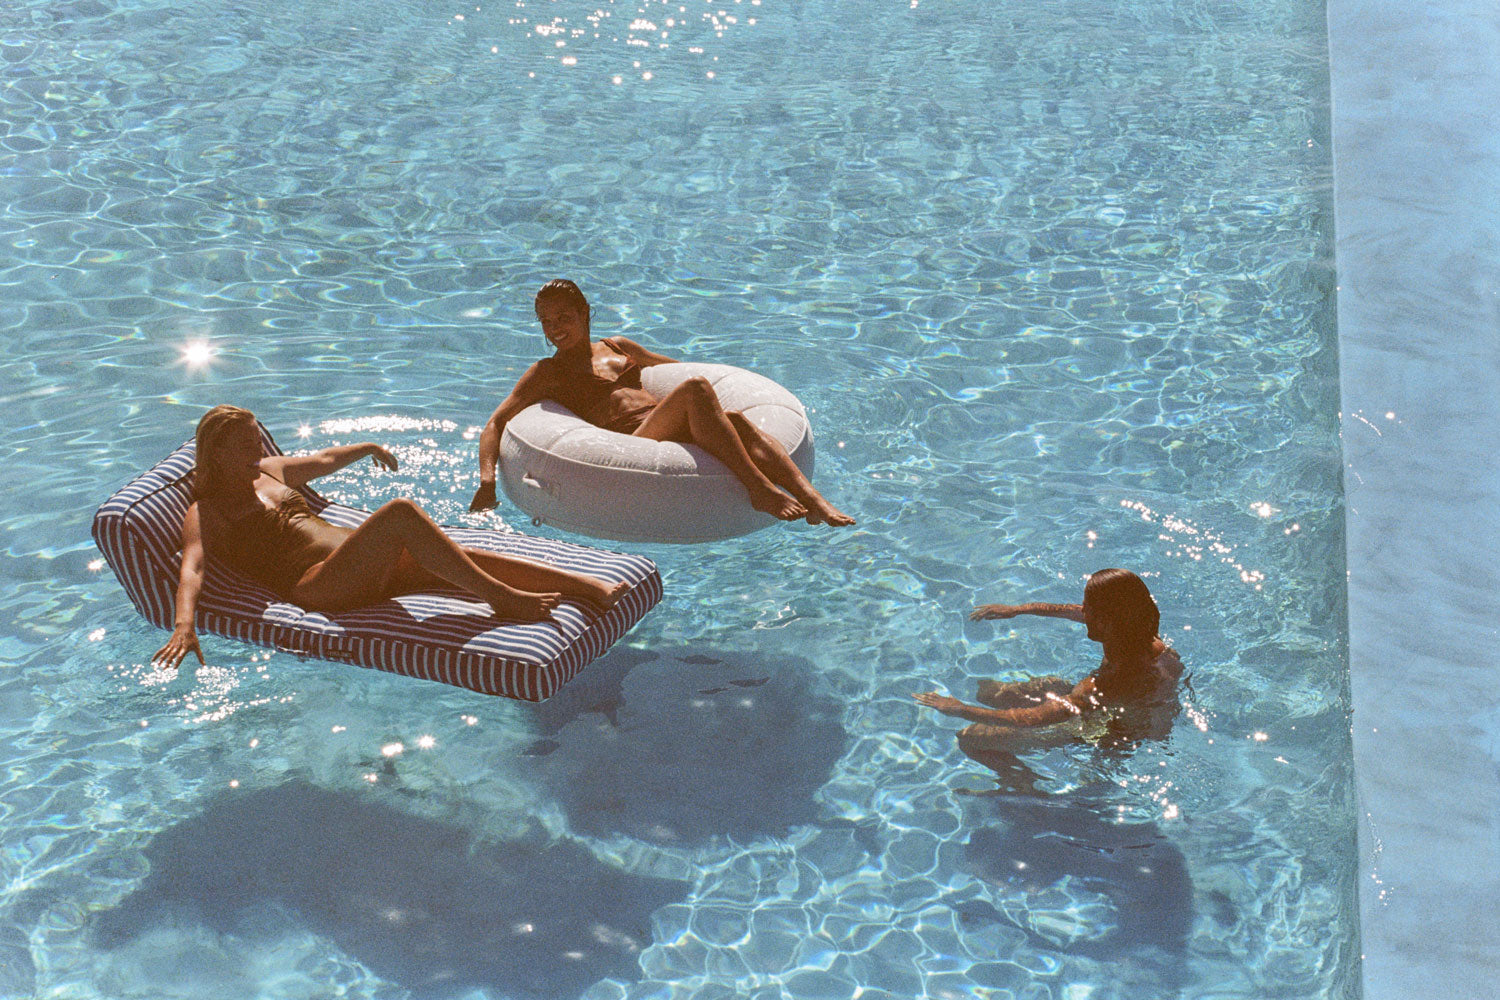 Two women lying on luxury pool floats in a swimming pool with a man swimming besides them.